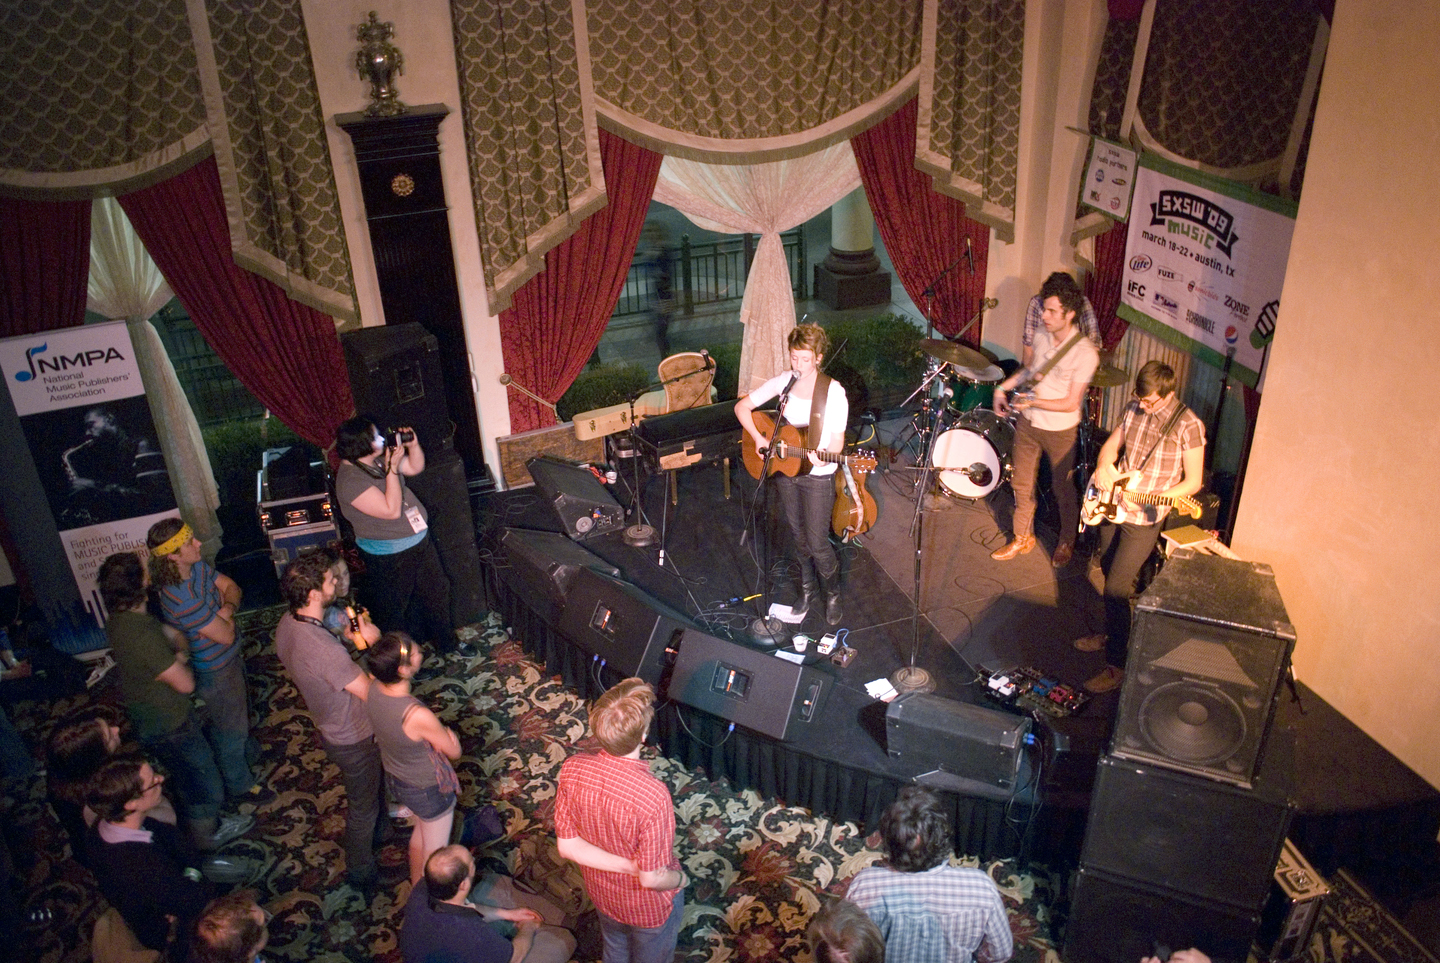 Haley Bonar performs in the Victorian Room at the Driskill Hotel in Austin, Texas, SXSW 2009